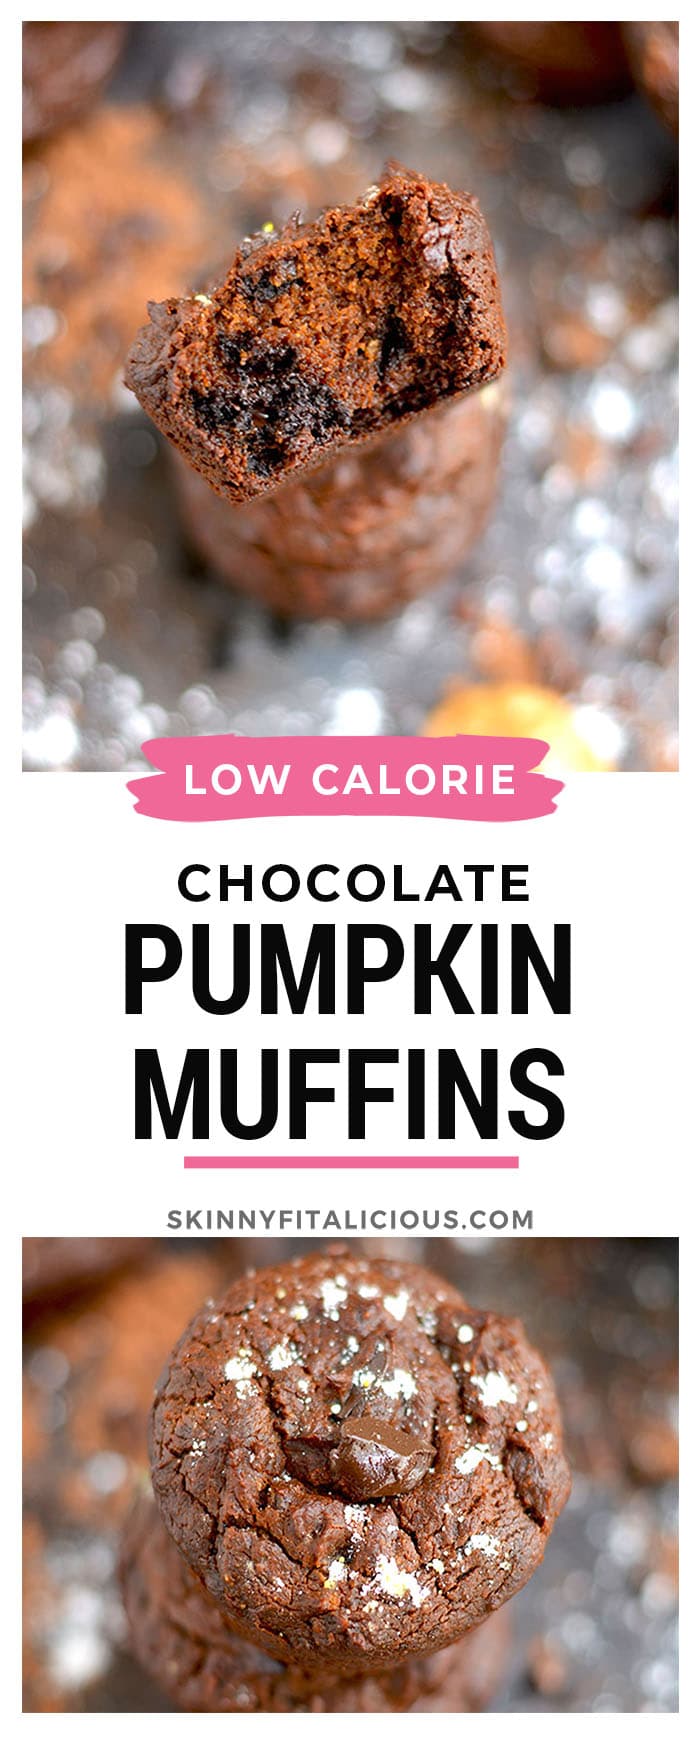 Chocolate Almond Pumpkin Muffins made healthy with whole food ingredients! Whether you're in it for the pumpkin, almond butter or chocolate these Chocolate Almond Pumpkin Muffins will give you your fix! Gluten Free + Low Calorie + Paleo